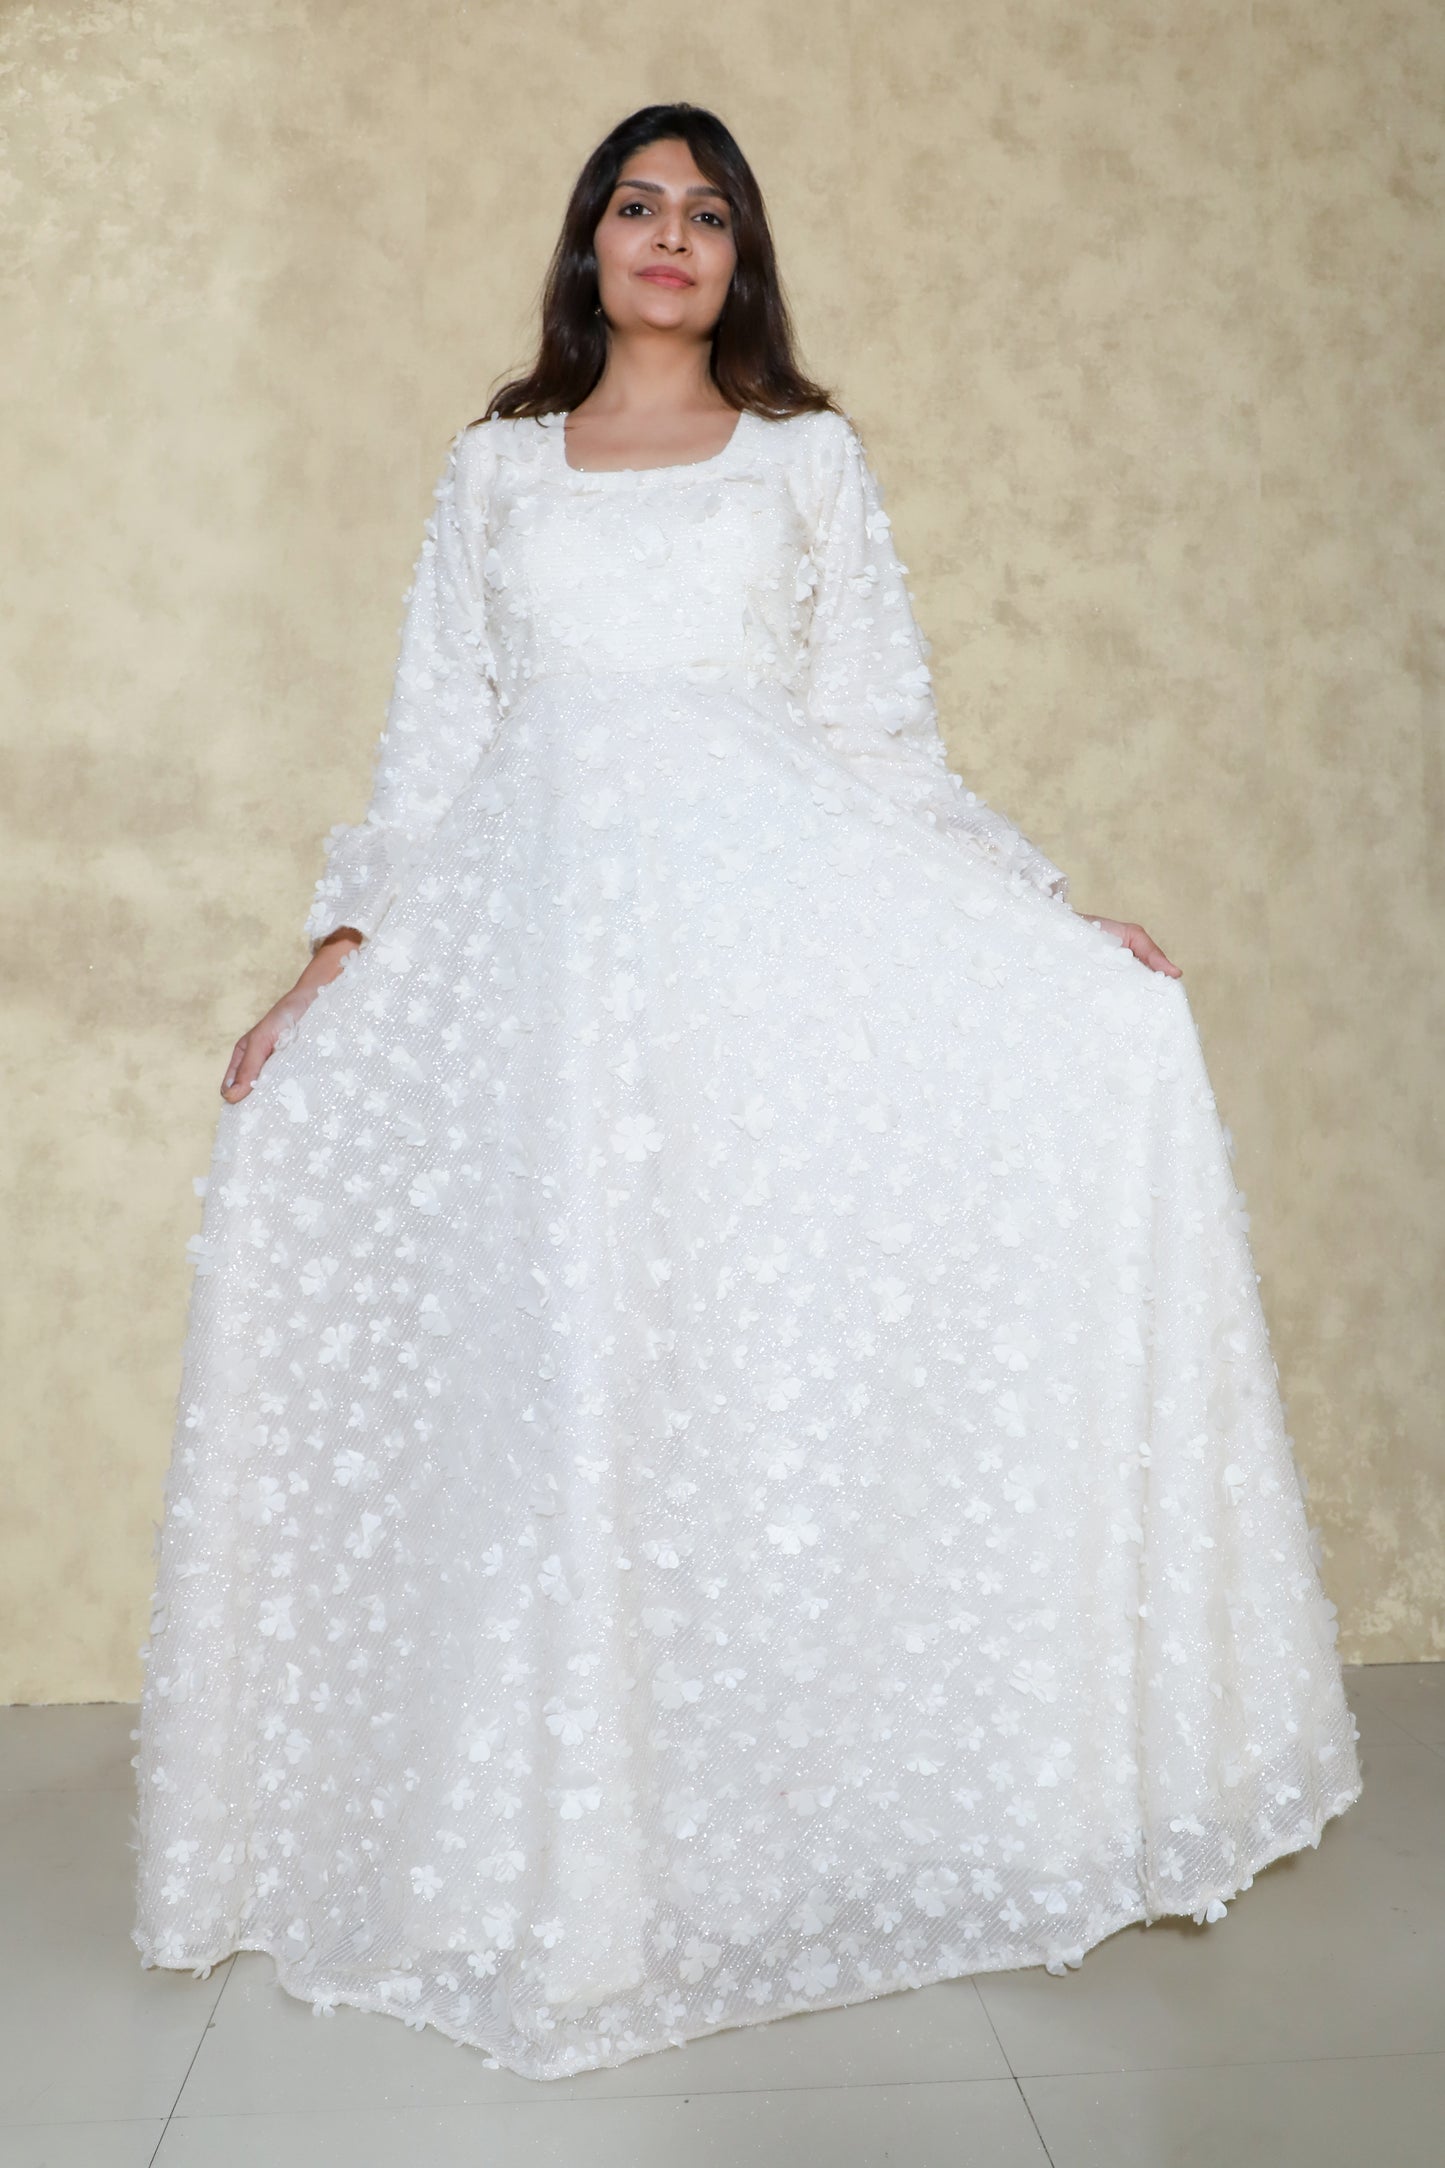 MKG5 FLORAL-DOLL WHITE GOWN